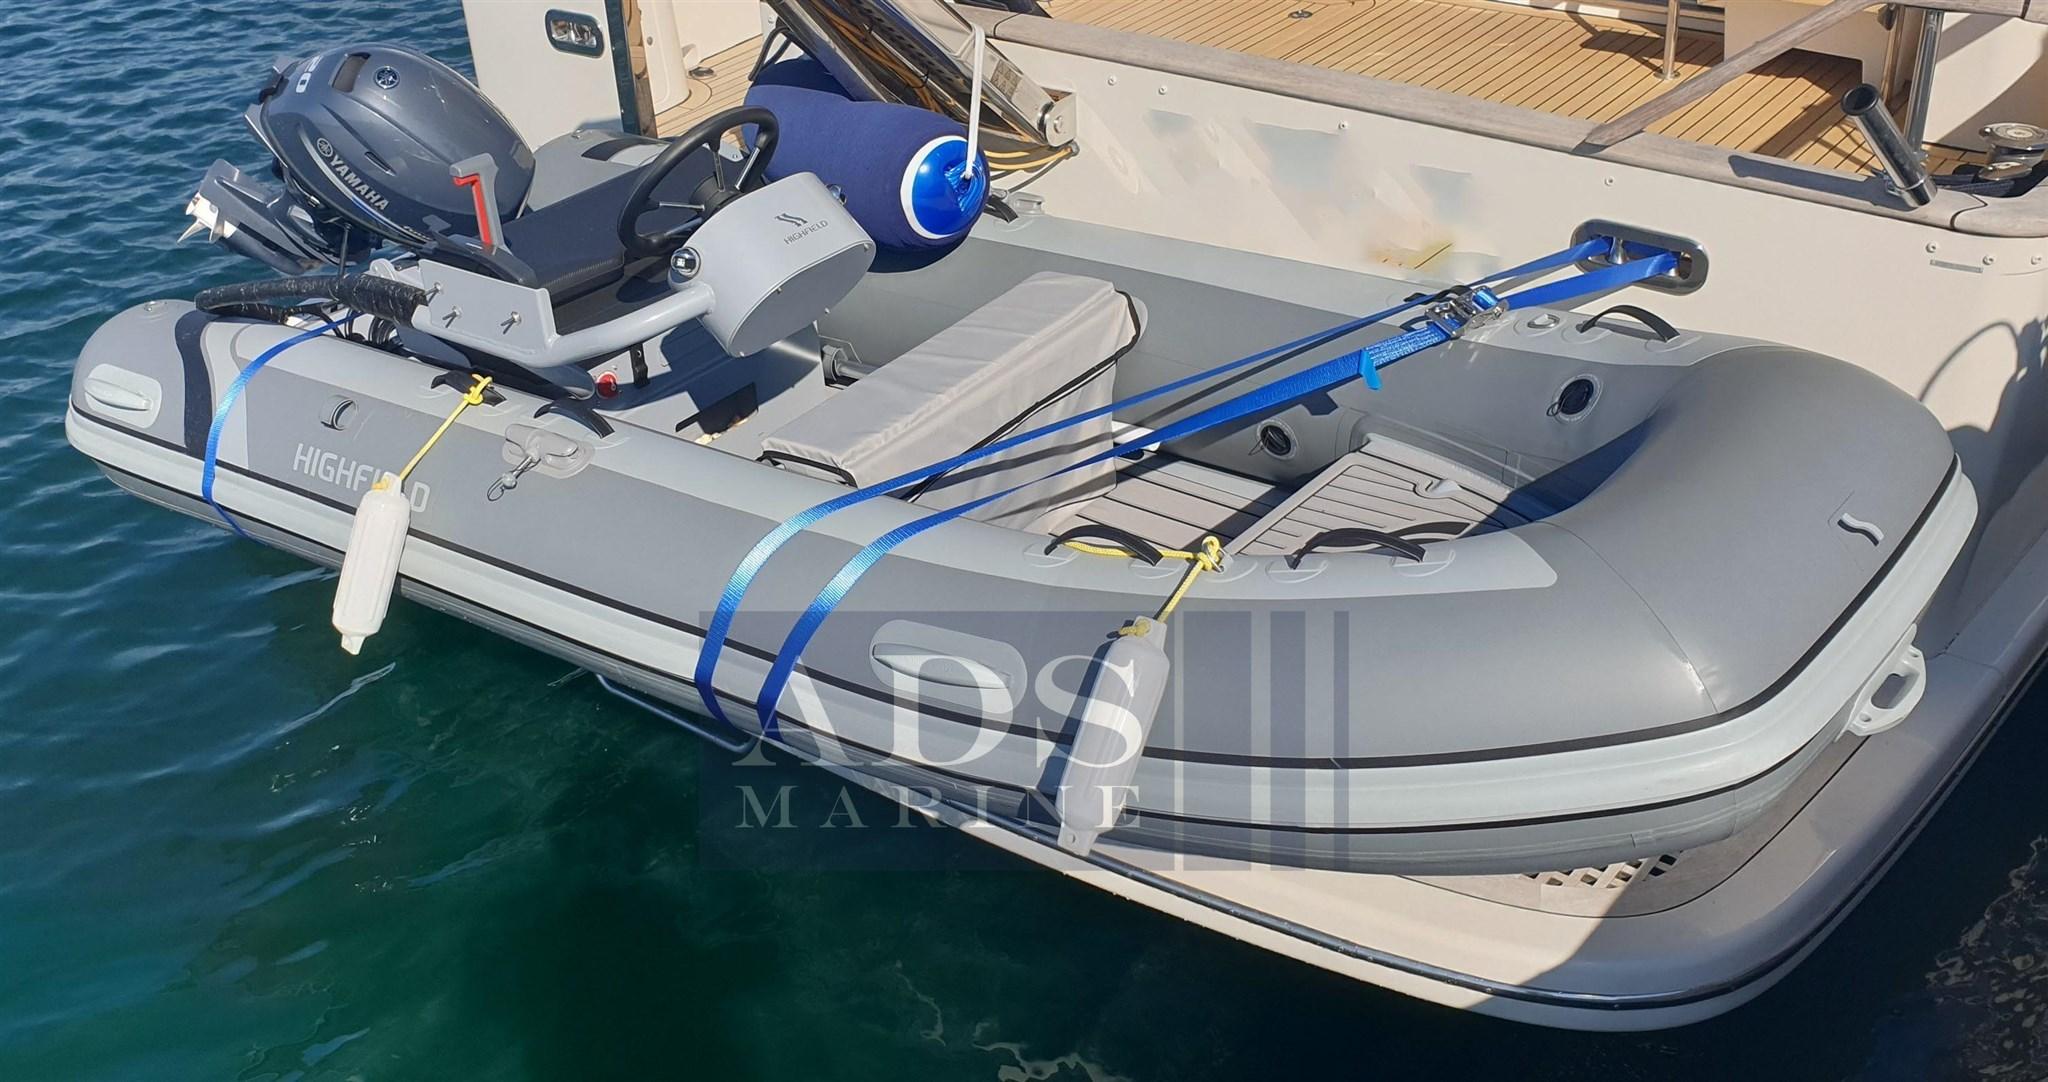 21 Highfield Cl360 Rigid Inflatable Boats Rib For Sale Yachtworld